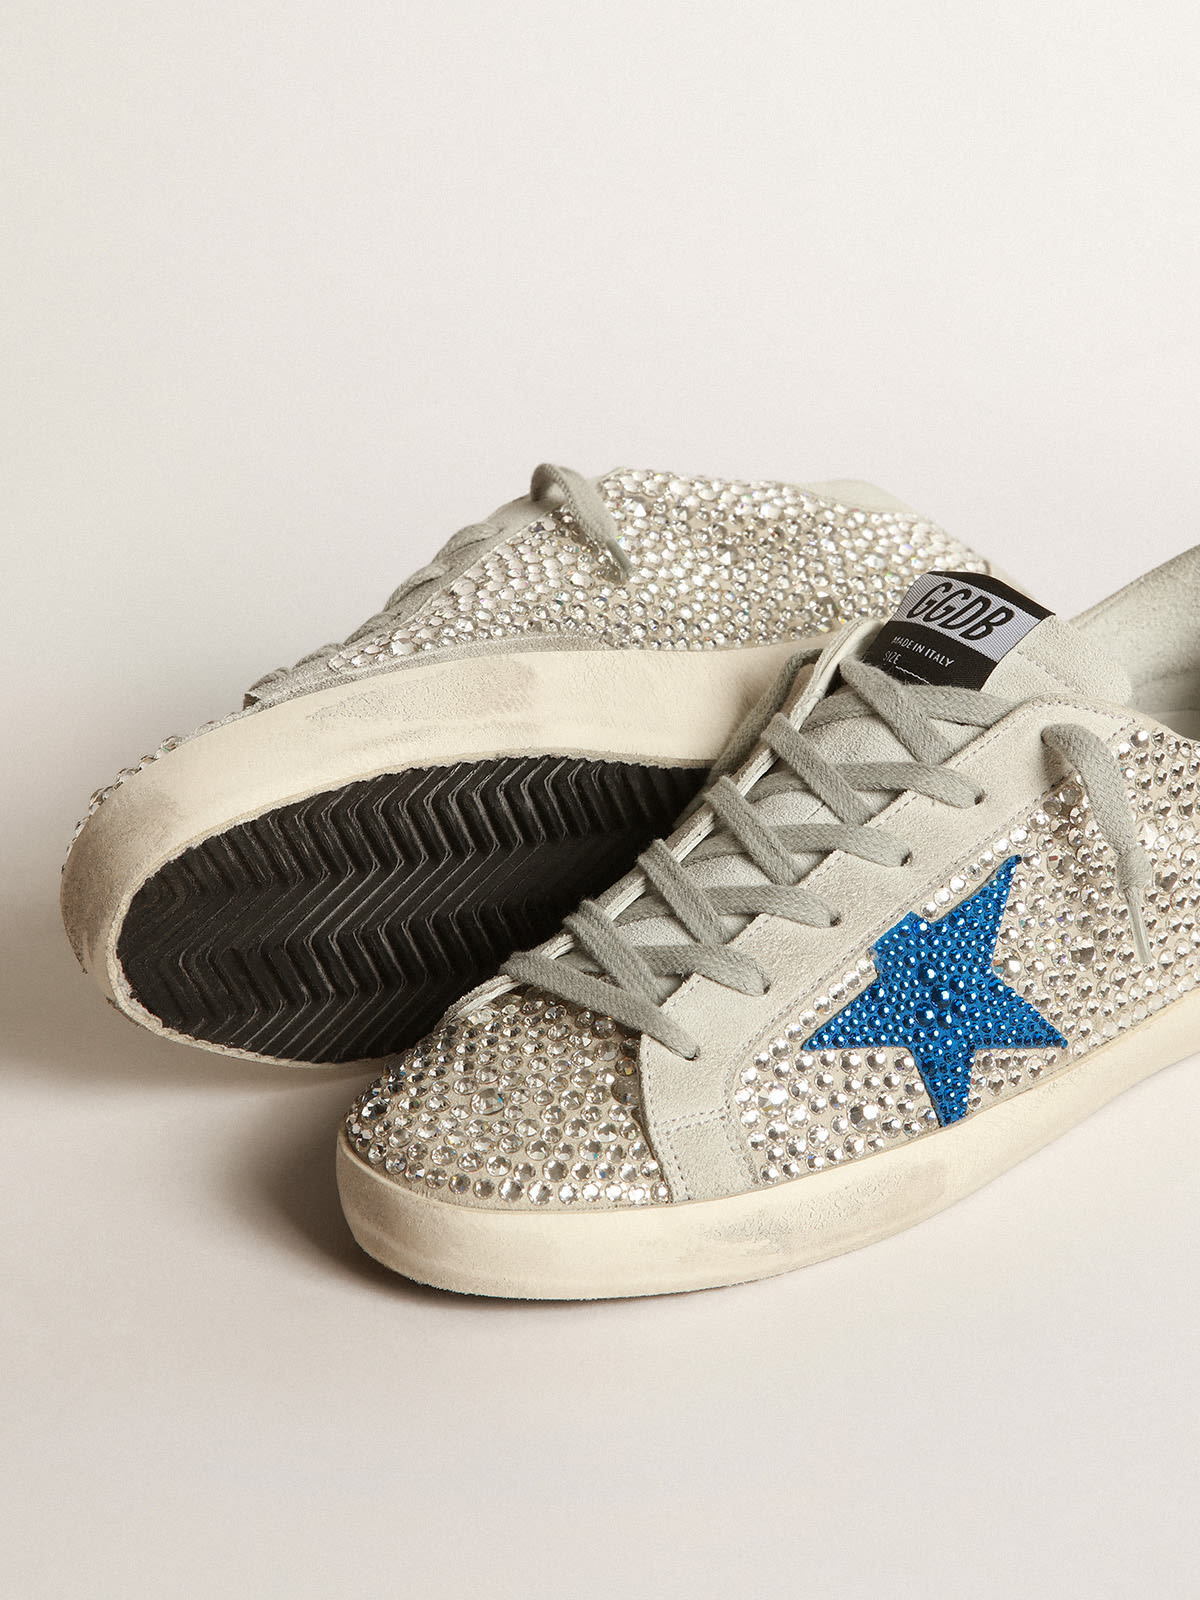 Golden Goose - Super-Star sneakers in gray suede and silver Swarovski crystals with blue suede and blue Swarovski crystal star in 